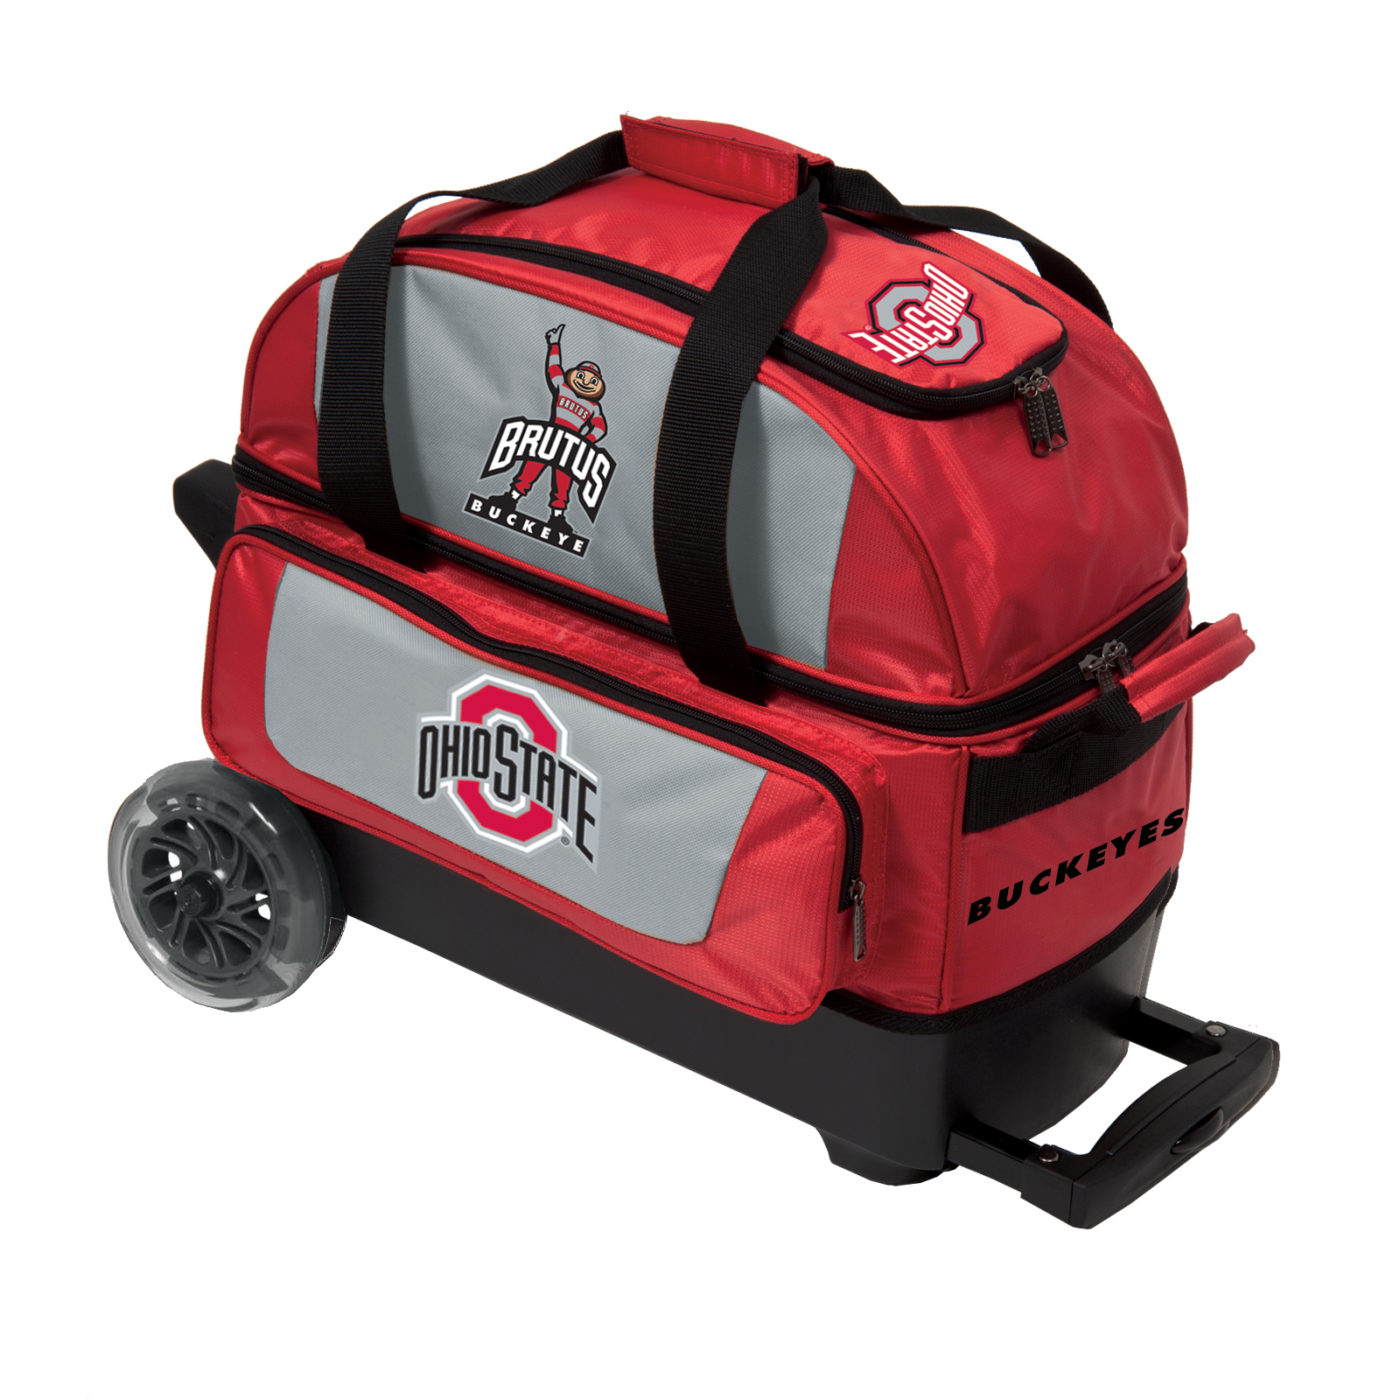 KR NCAA 2 Ball Double Roller Ohio State Buckeyes Bowling Bag Questions & Answers